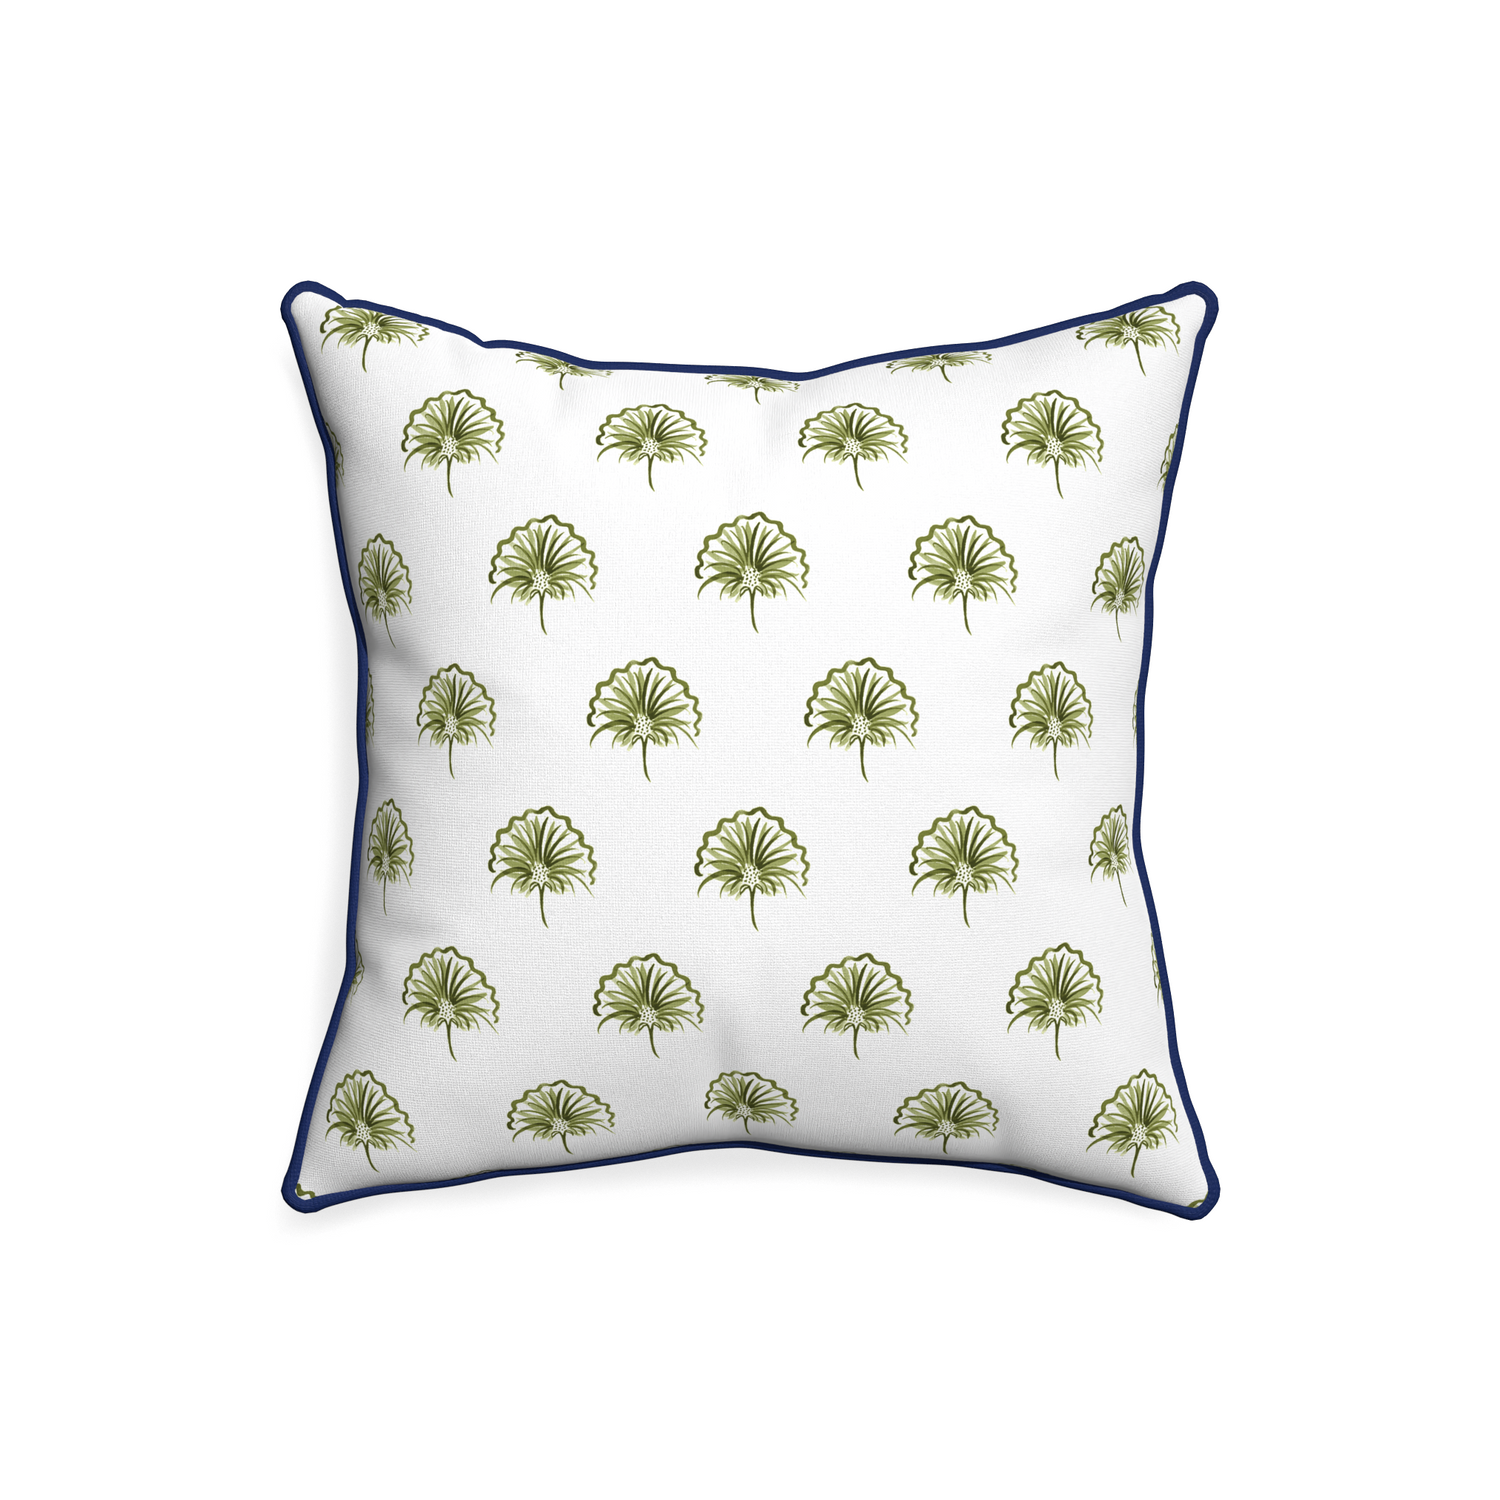 20-square penelope moss custom green floralpillow with midnight piping on white background